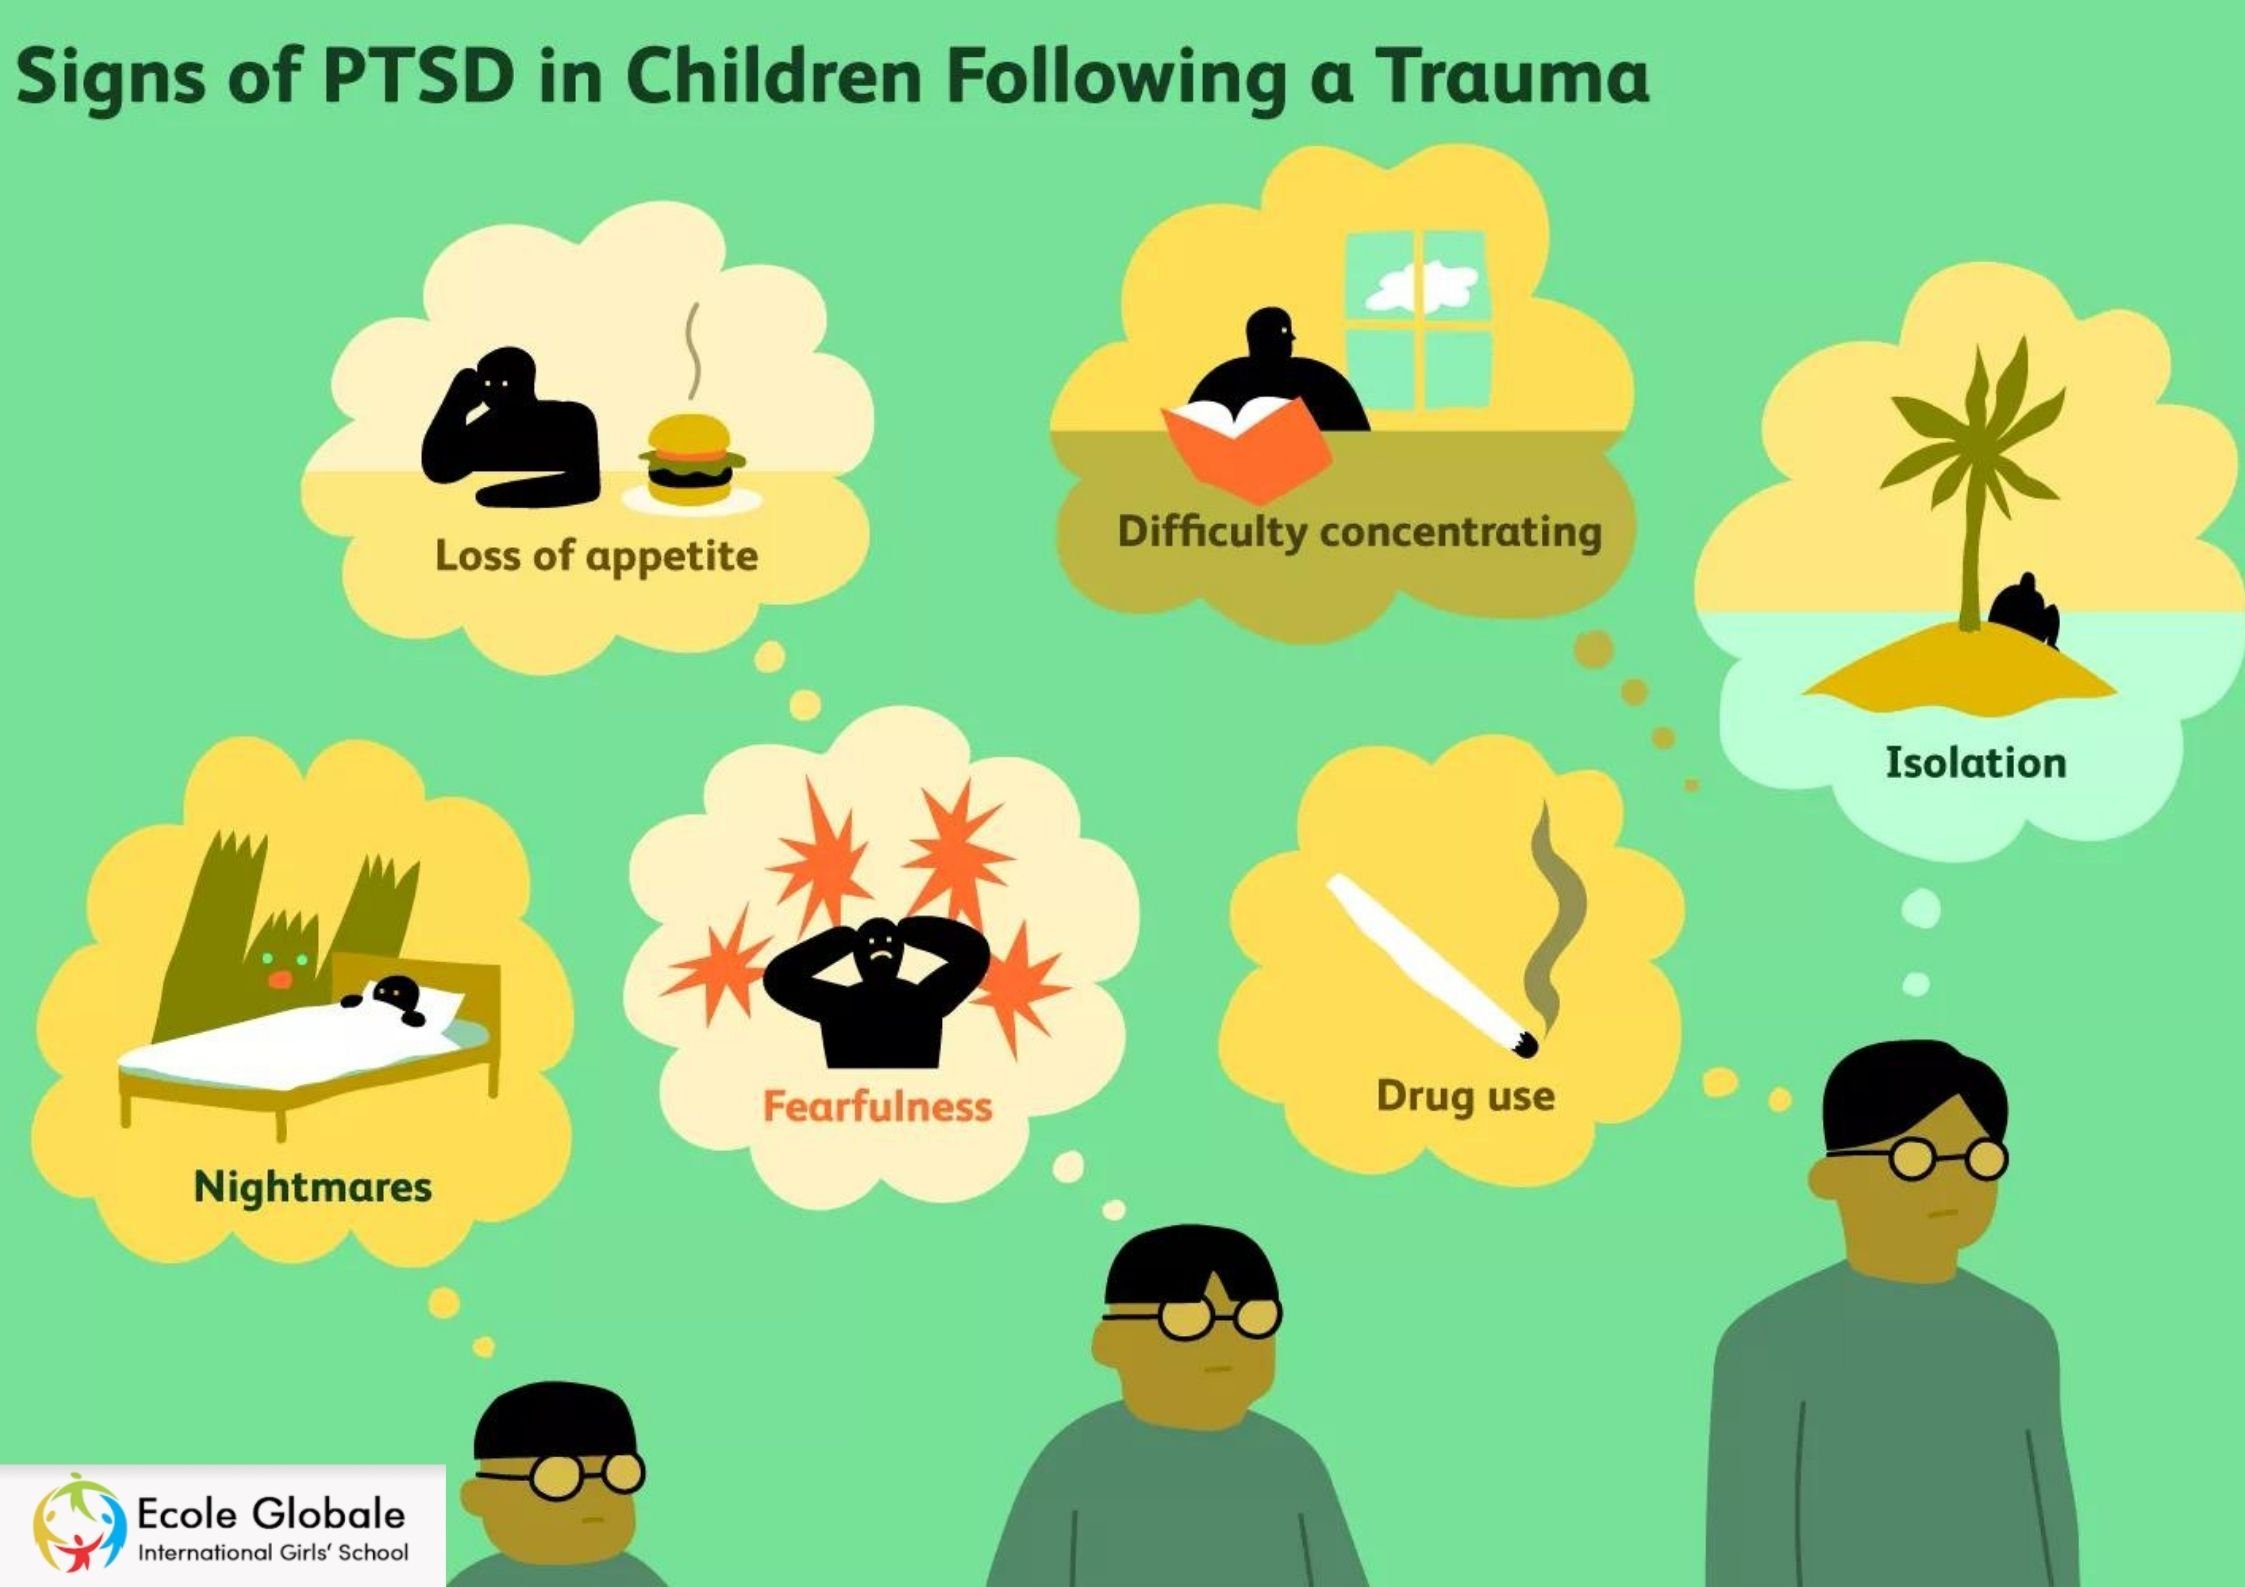 How To Help And Approach Students Going Through PTSD?